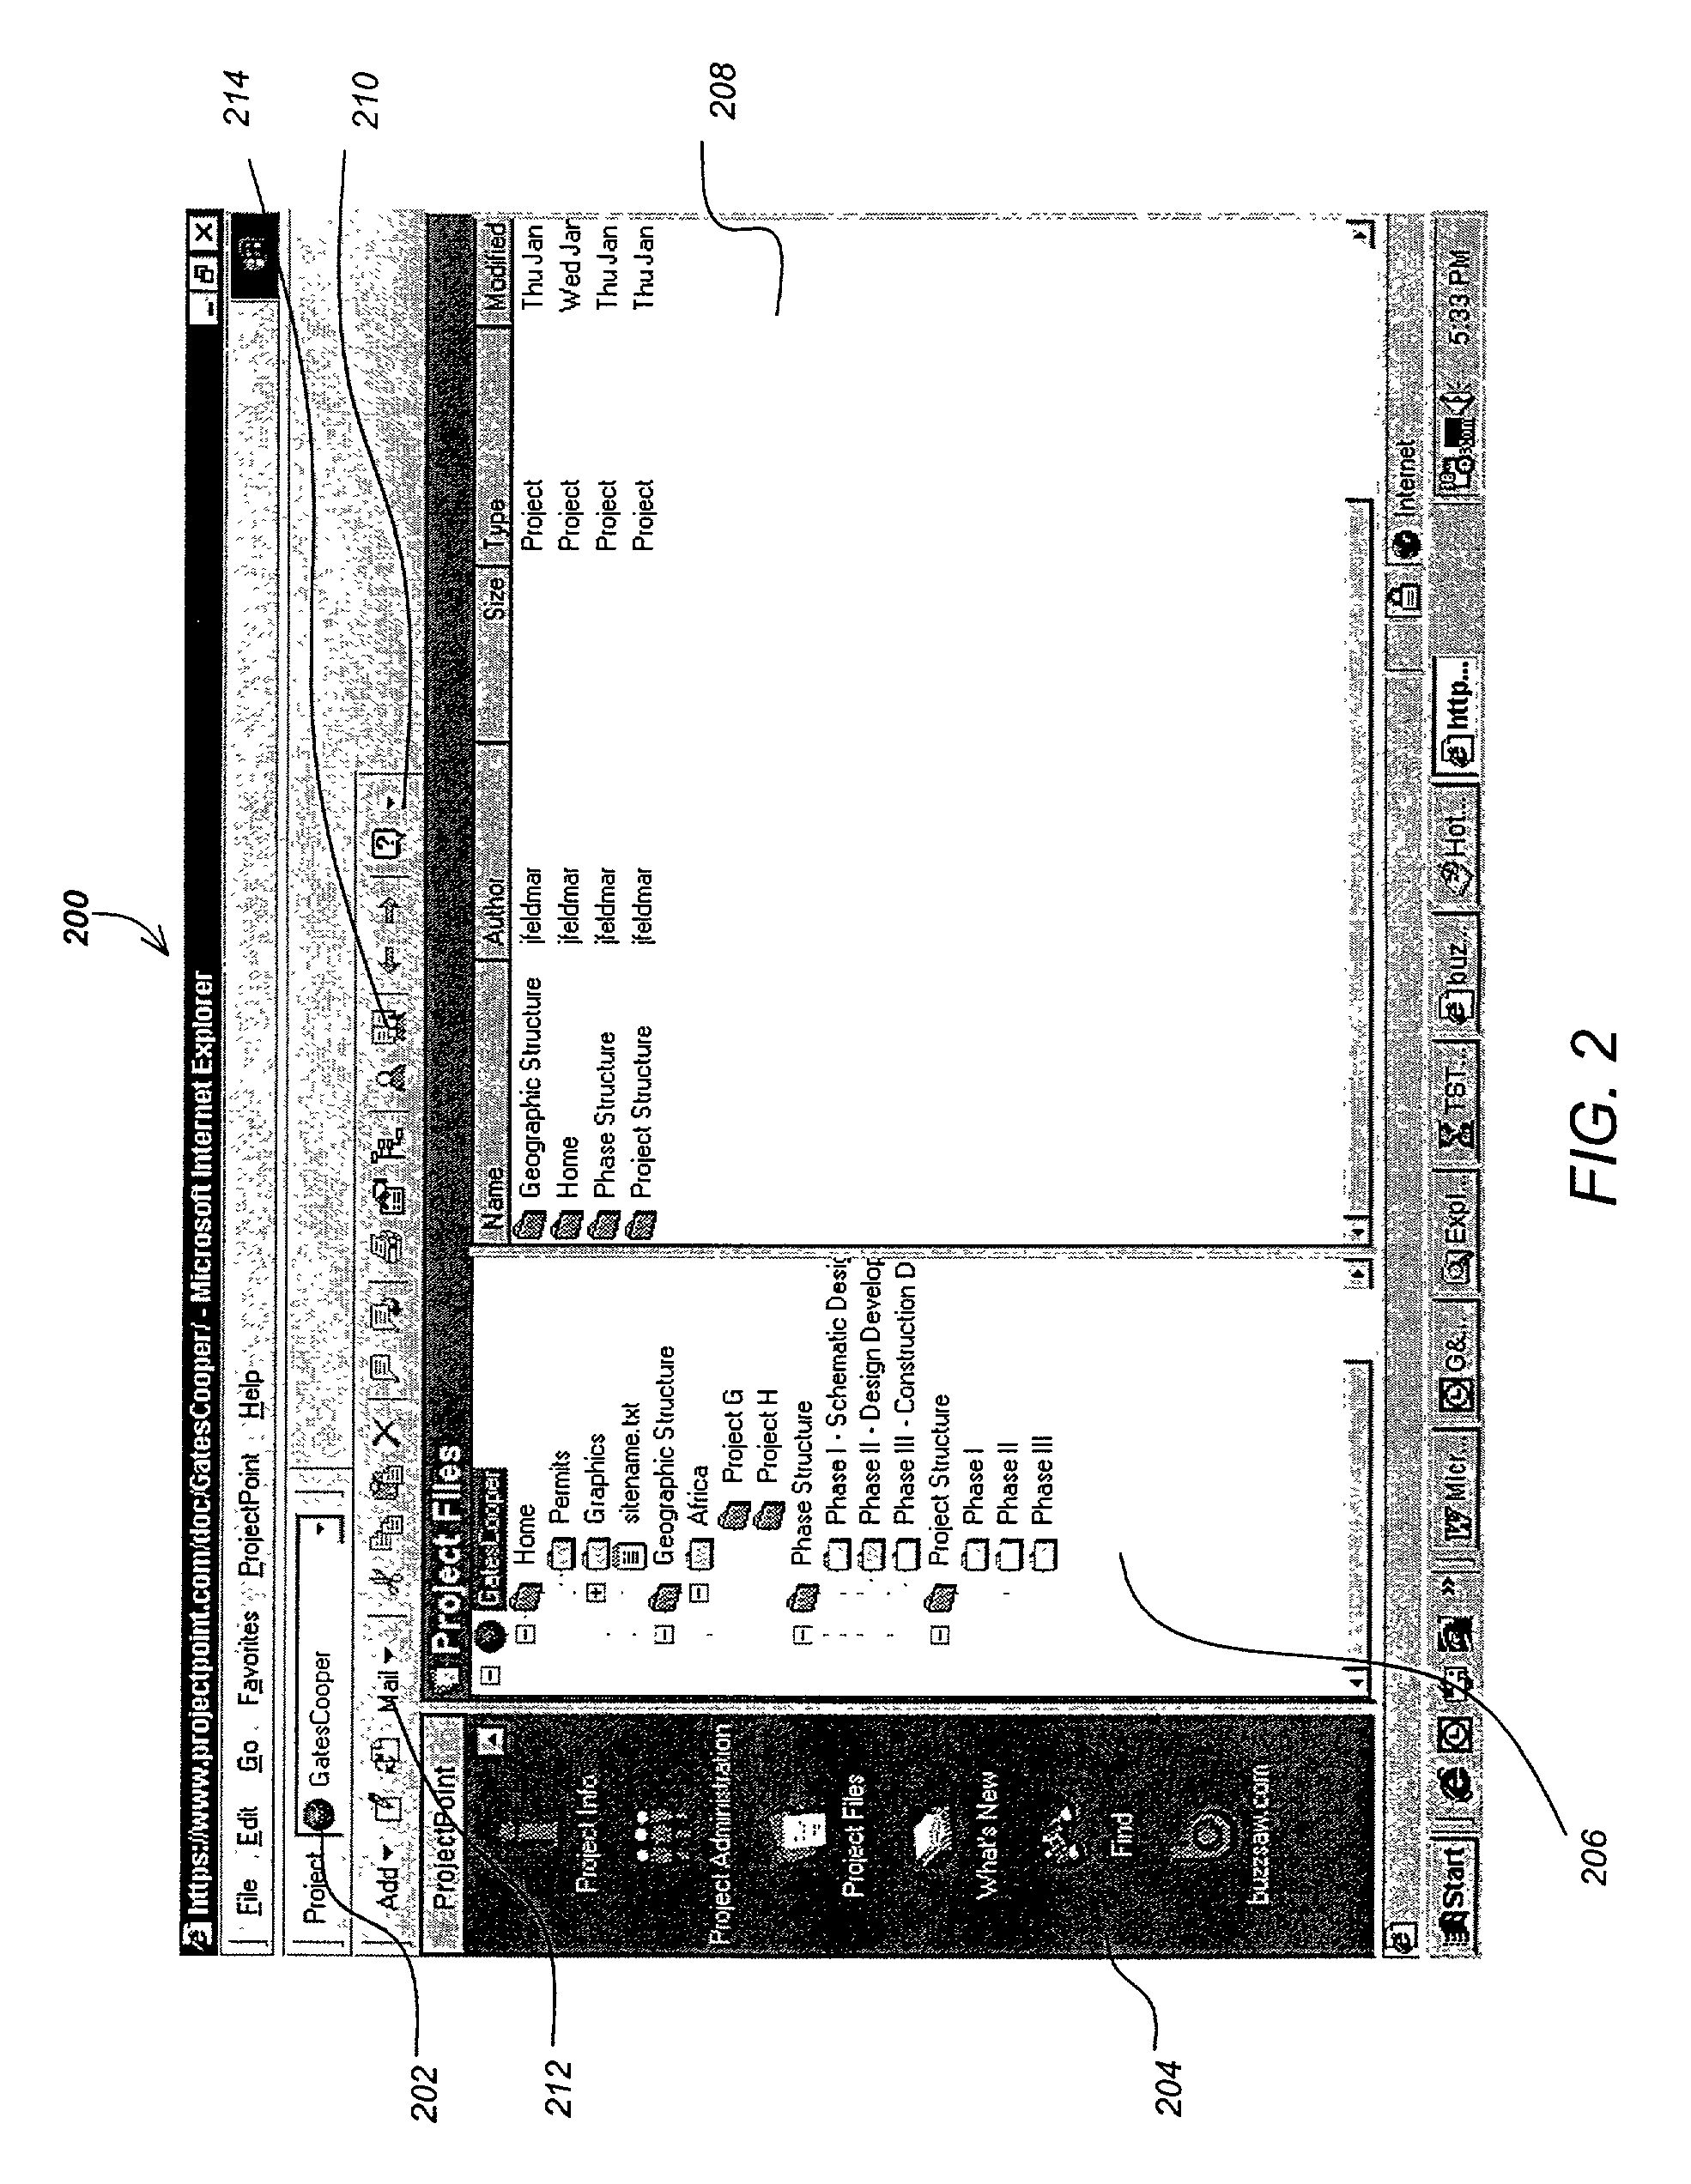 Method and apparatus for providing drawing collaboration on a network